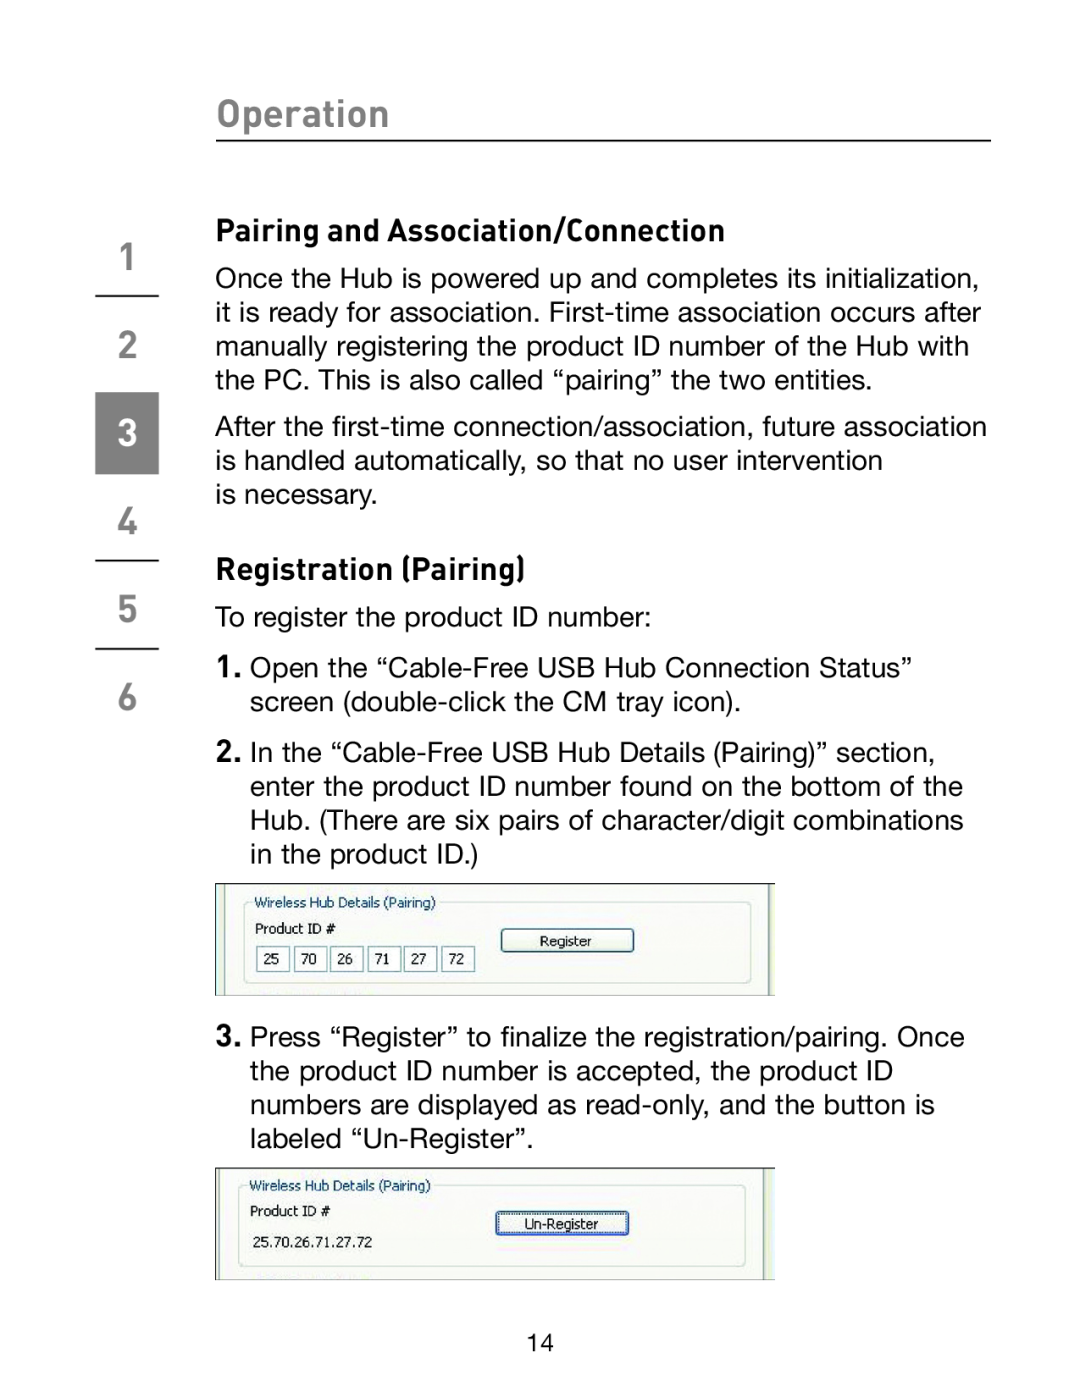 Belkin F5U301 user manual Pairing and Association/Connection, Registration Pairing, Operation 